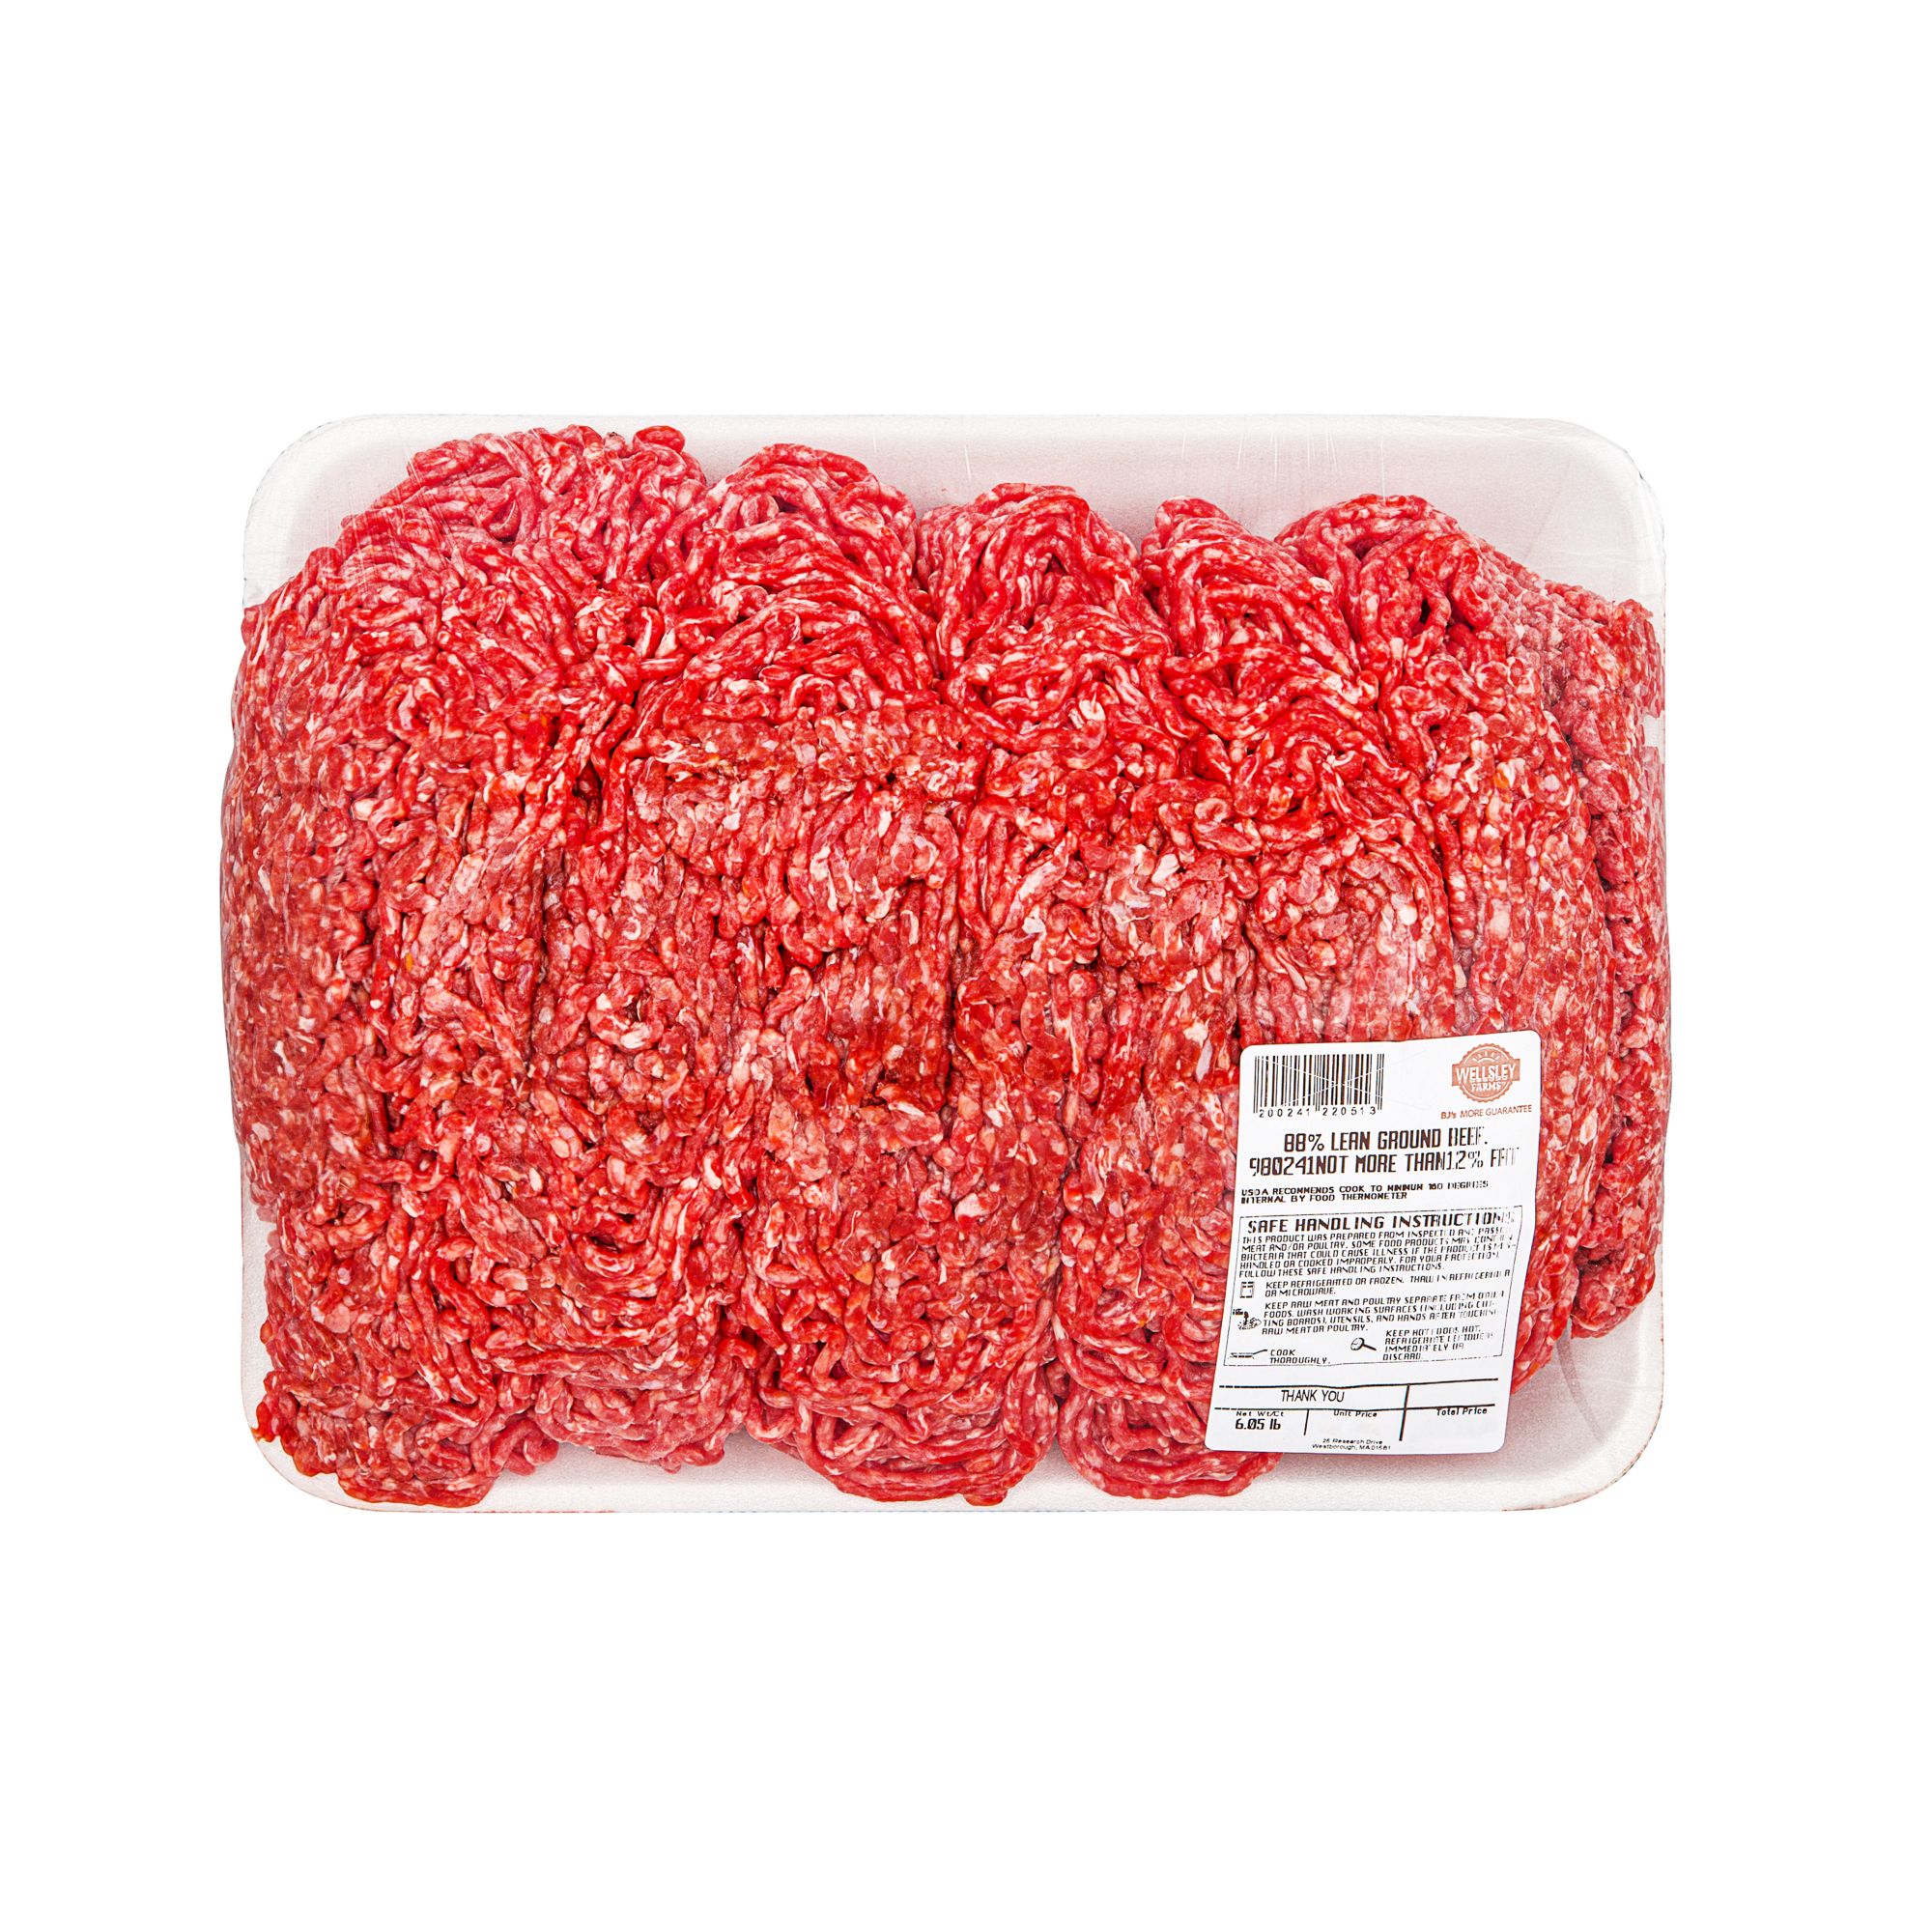 Ground Meat Chub Bags 1 pound Combo Pack